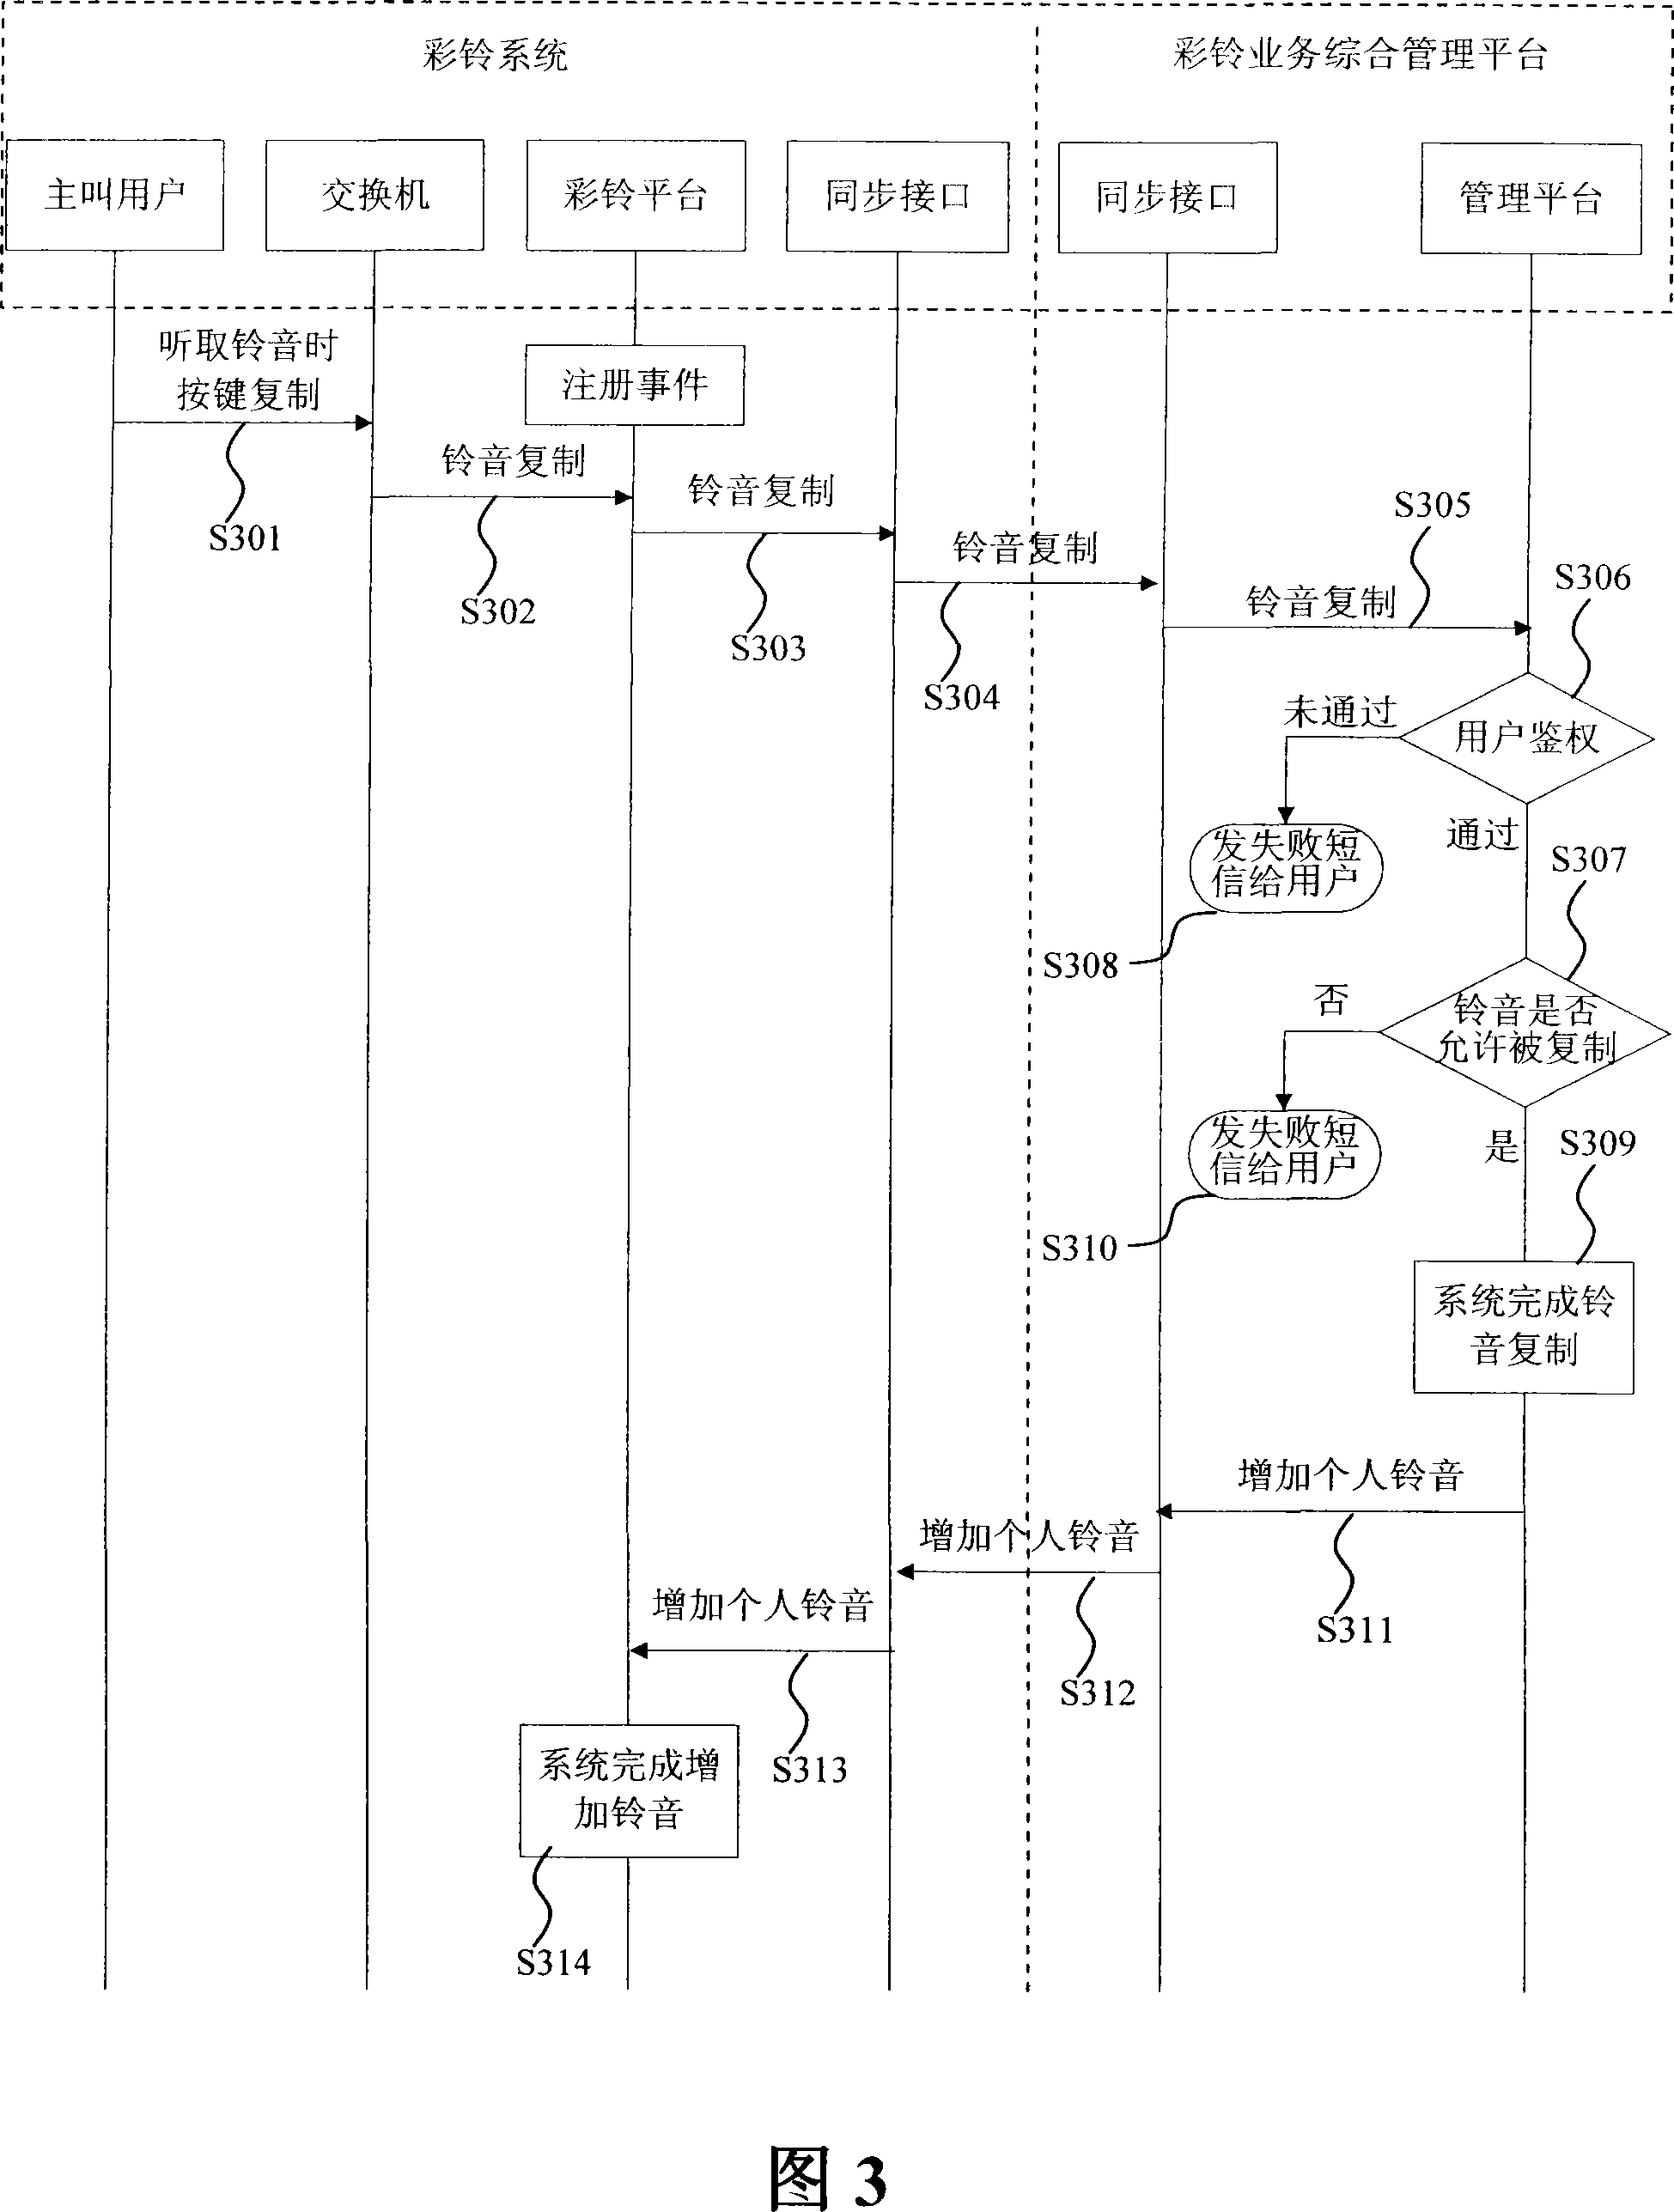 System and message for implementing reproduction of push button key among multiple color ring systems